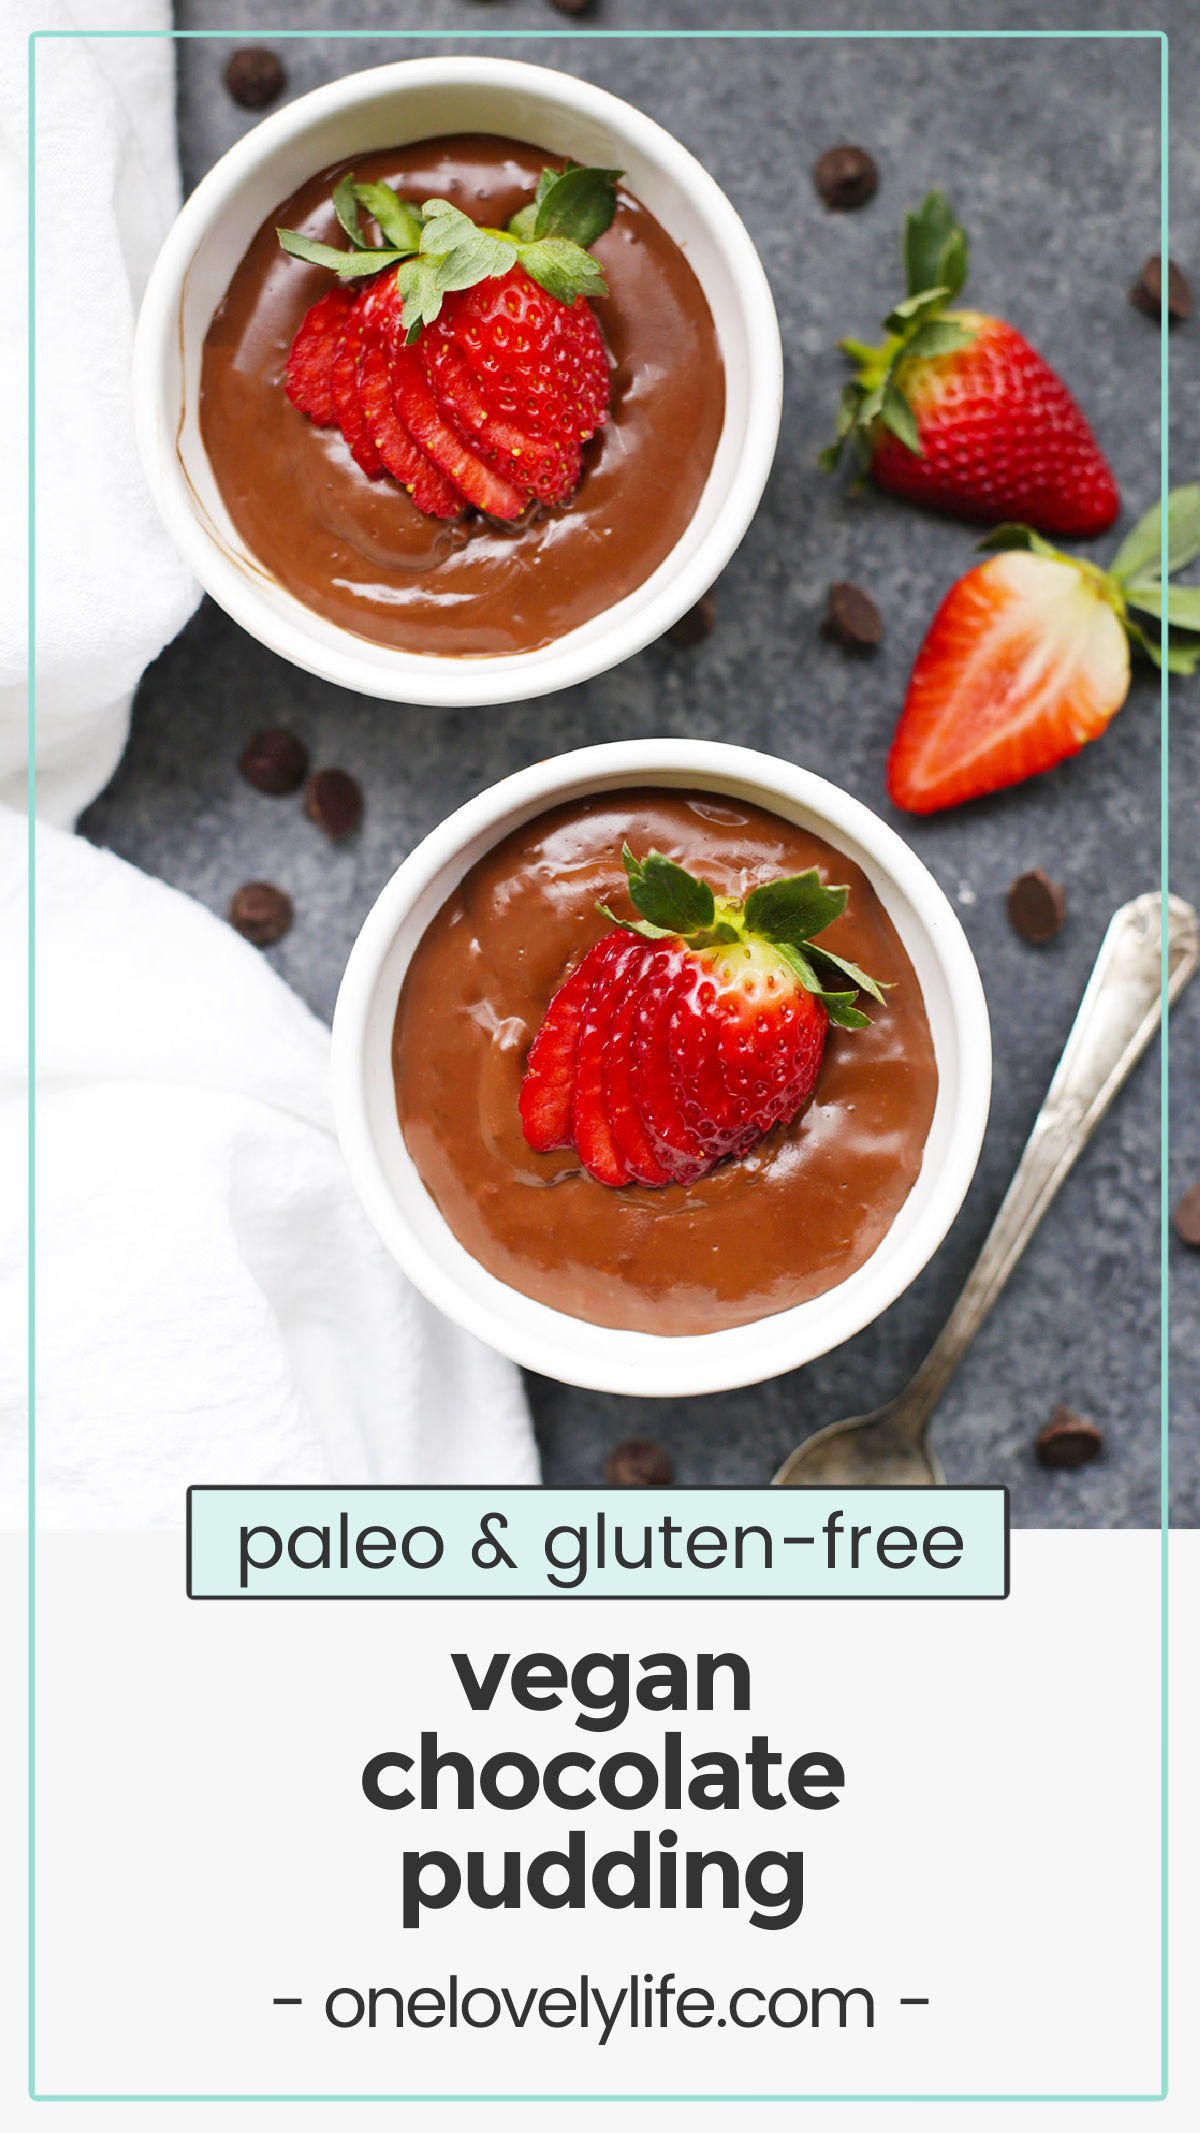 The BEST Vegan Chocolate Pudding - No weird ingredients, this is the real deal. Chocolatey, rich, and silky to boot! (Gluten free & Paleo) // dairy free chocolate pudding // gluten-free chocolate pudding // paleo chocolate pudding // healthy chocolate pudding recipe // vegan chocolate pudding no tofu // vegan chocolate pudding no avocado // vegan Valentine's Day dessert // paleo Valentine's Day dessert